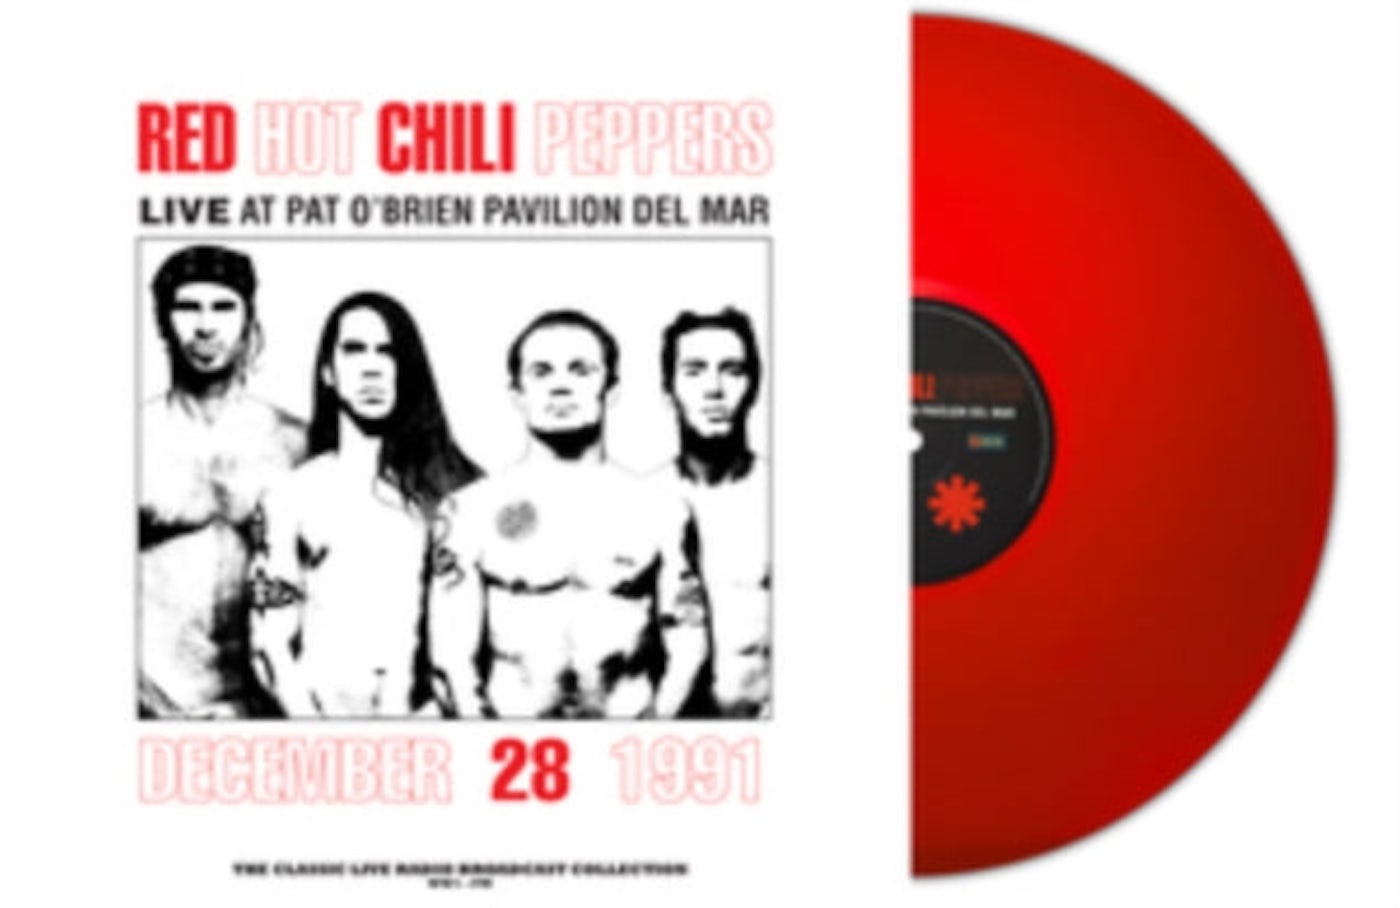 Red Hot Peppers LP - At Pat O Brien Pavilion Del Mar (Red